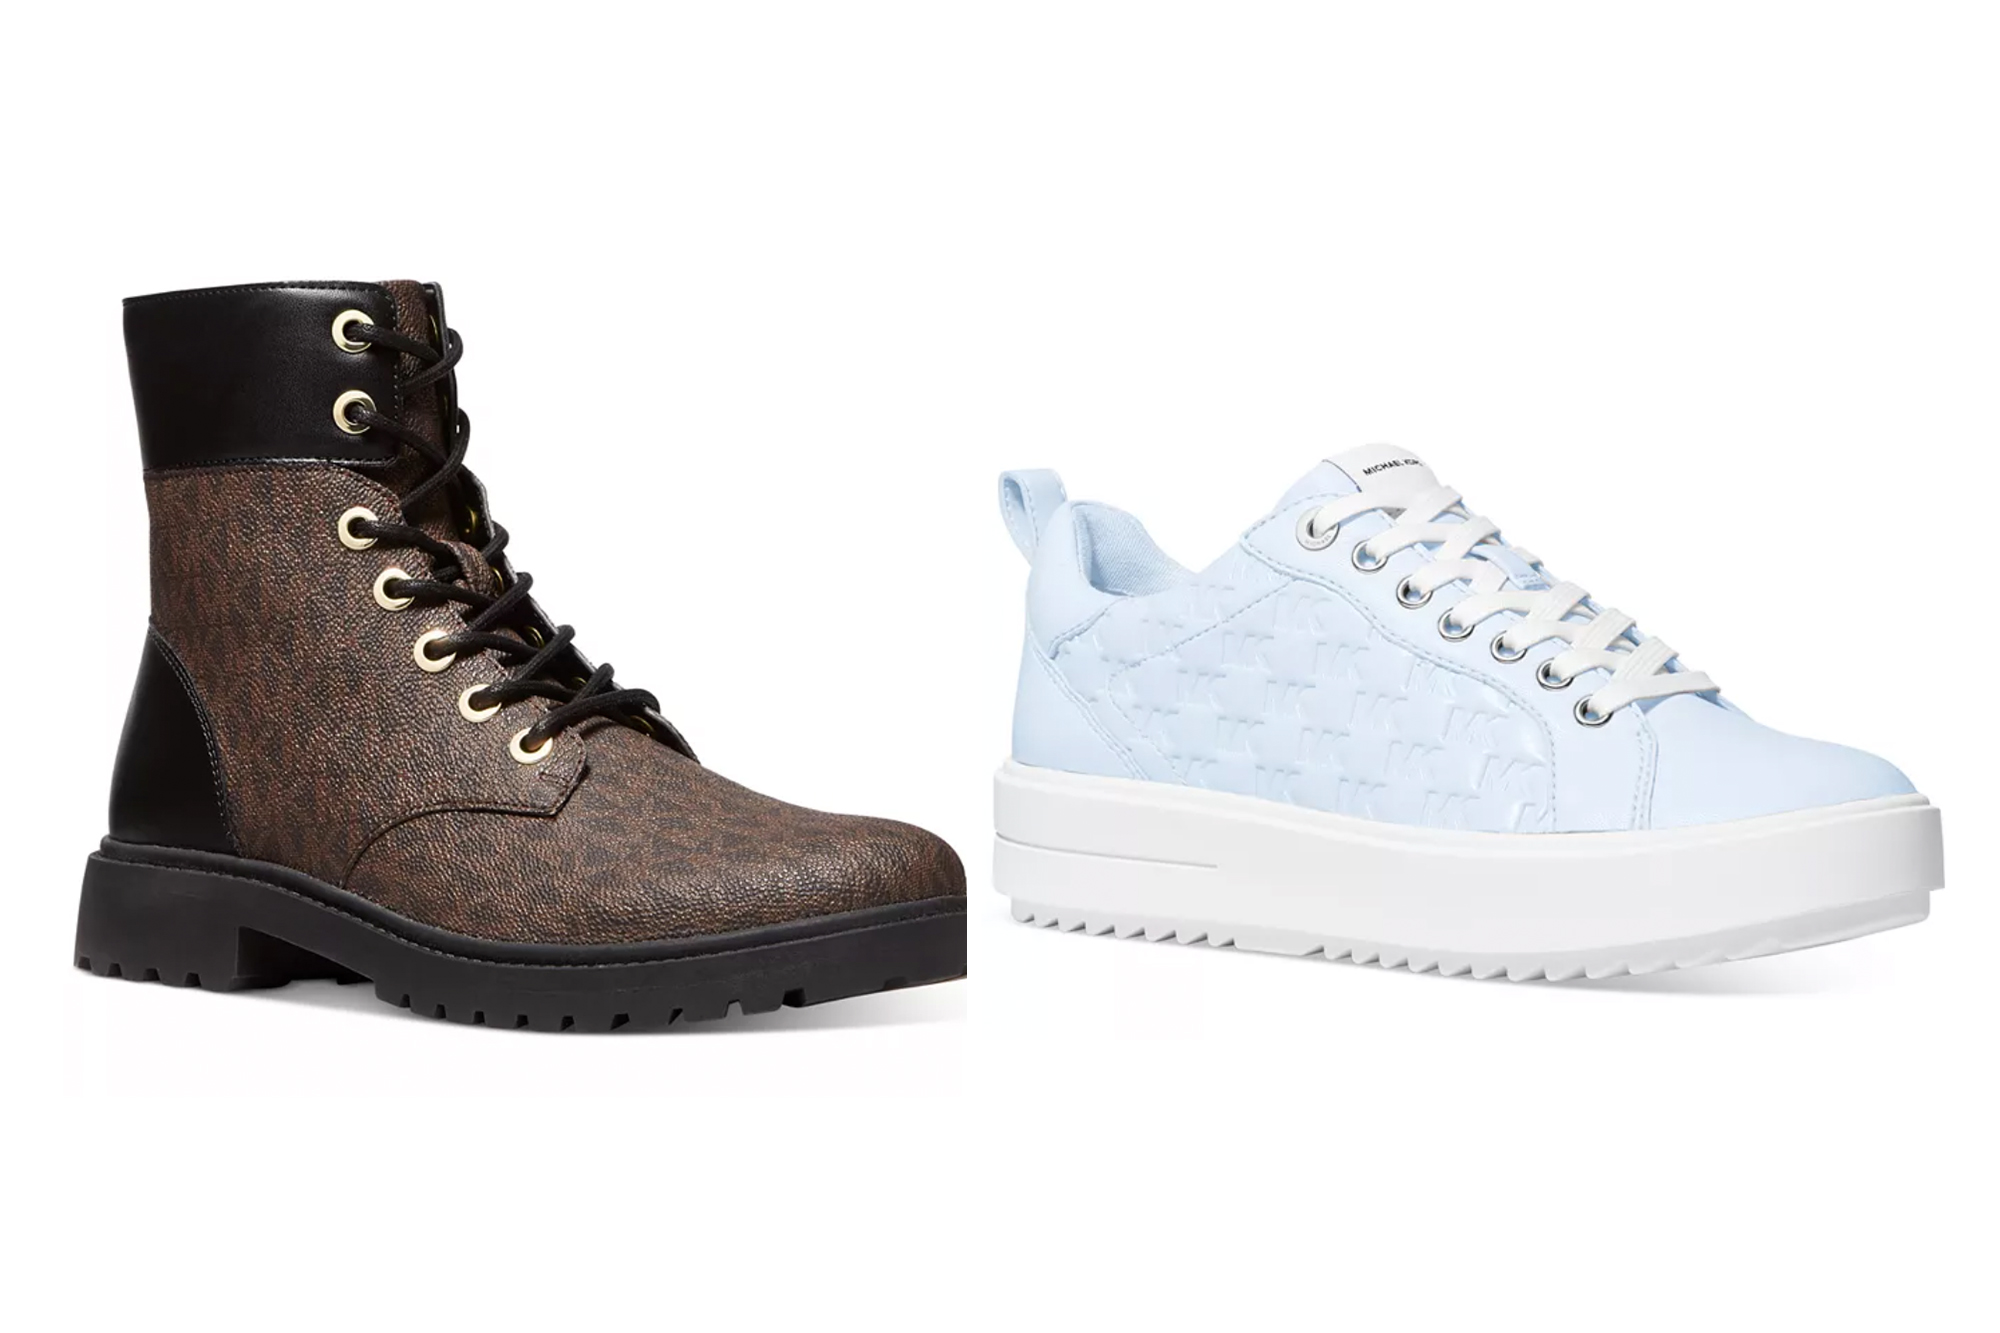 Macy's Deals on Michael Kors Boots and Sneakers — Up to 52% Off